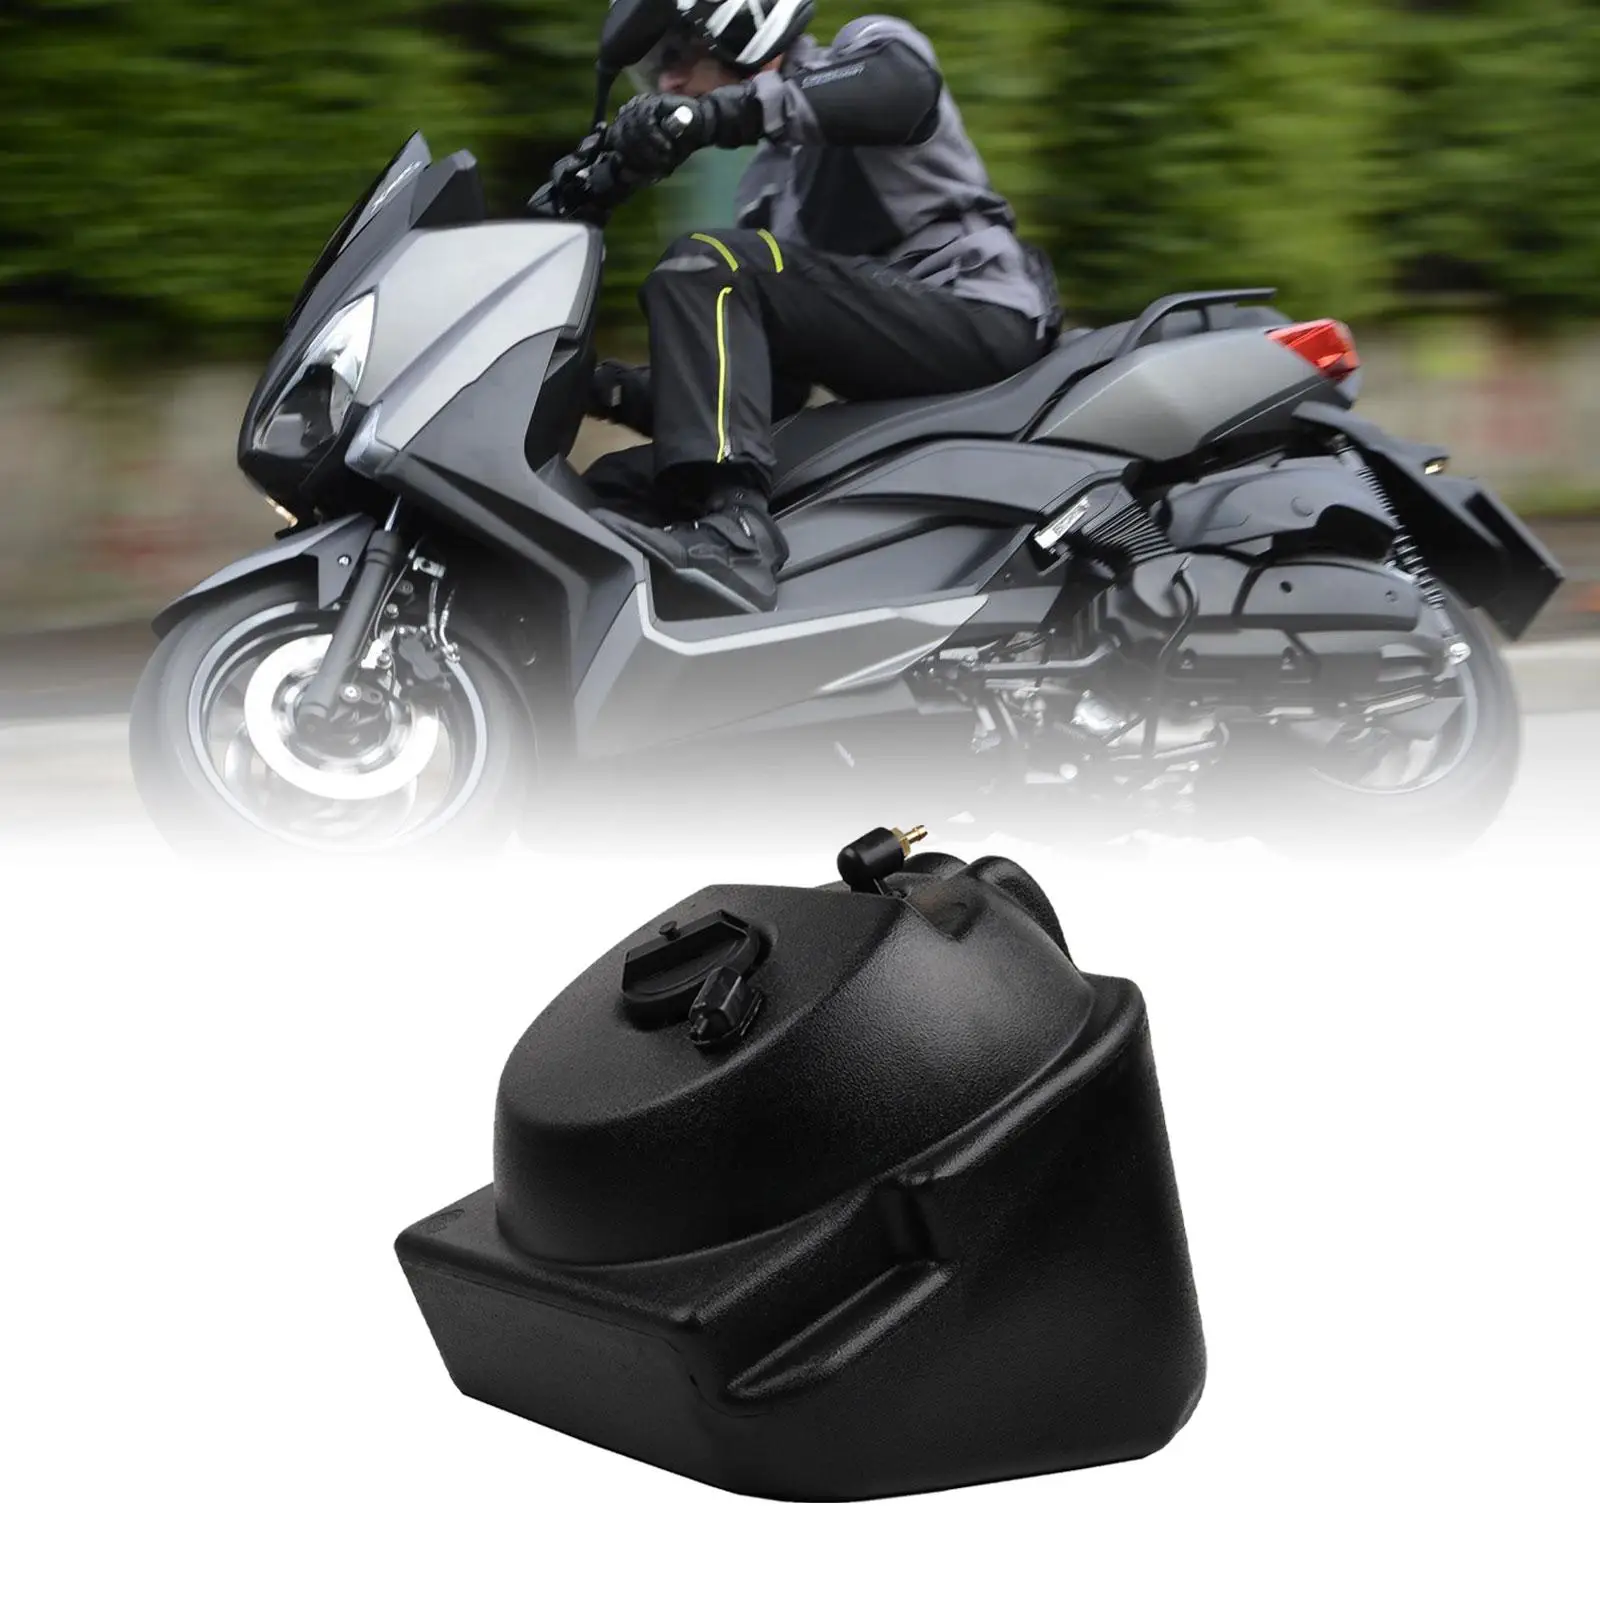 Black Auxiliary Fuel Tank Motorcycle Fuel Tank Easy Installation Motorcycle